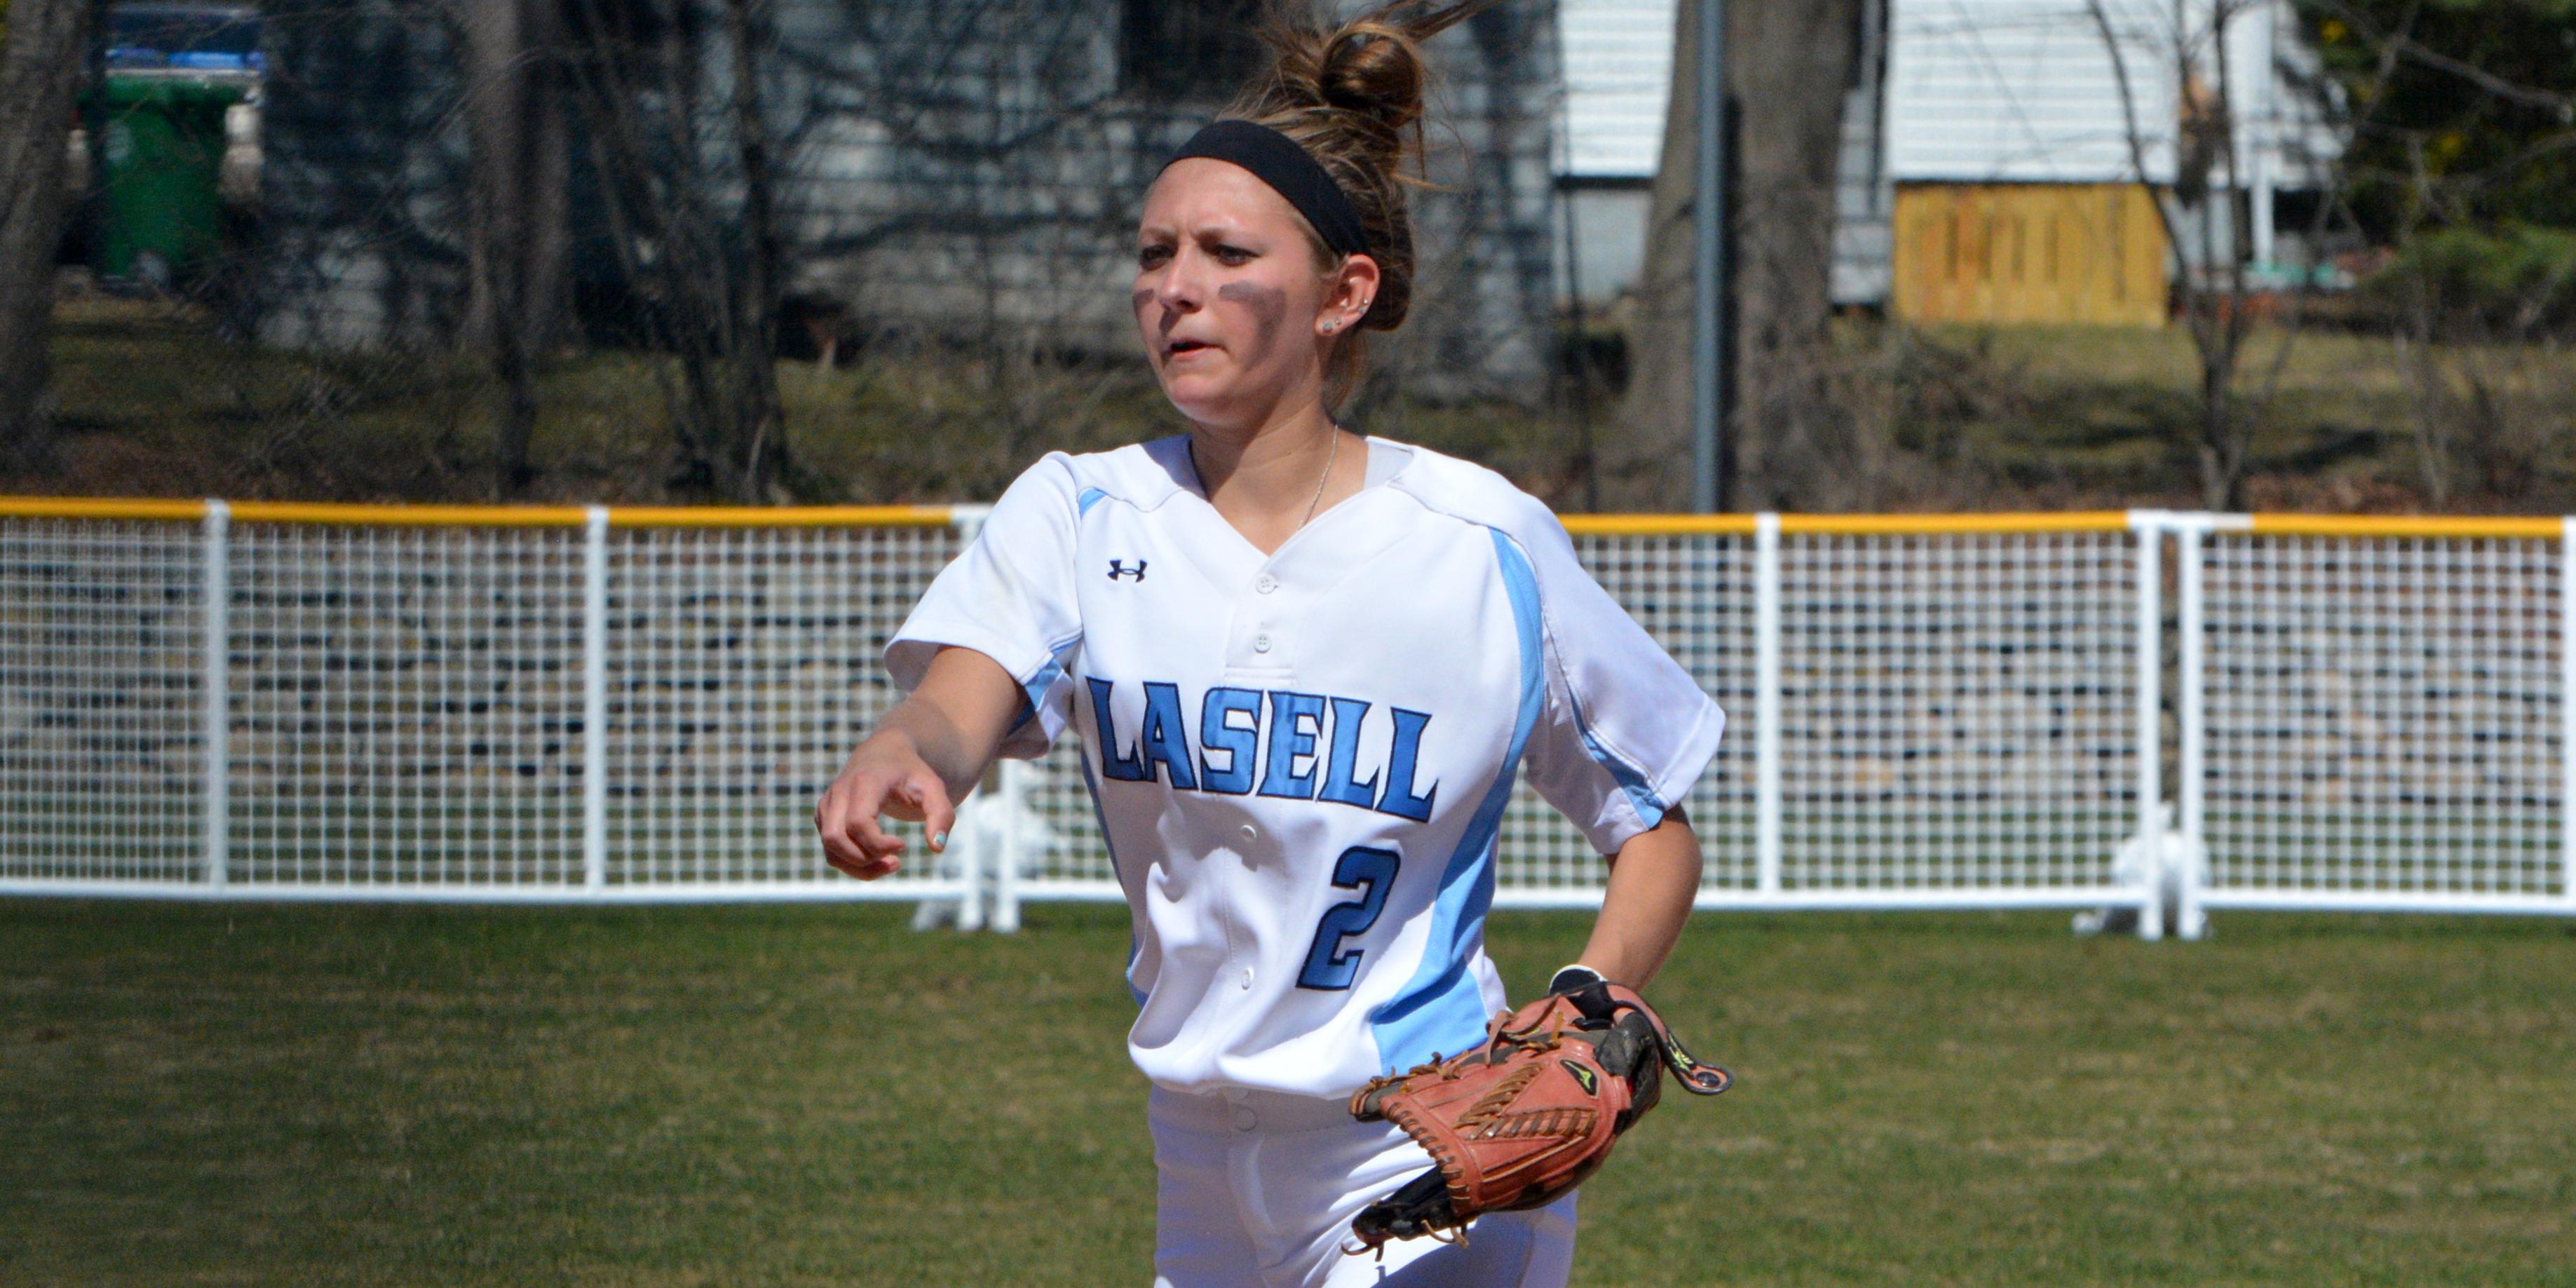 Falcons Take Two From Lasell, 7-4 and 11-2 in GNAC Softball Action